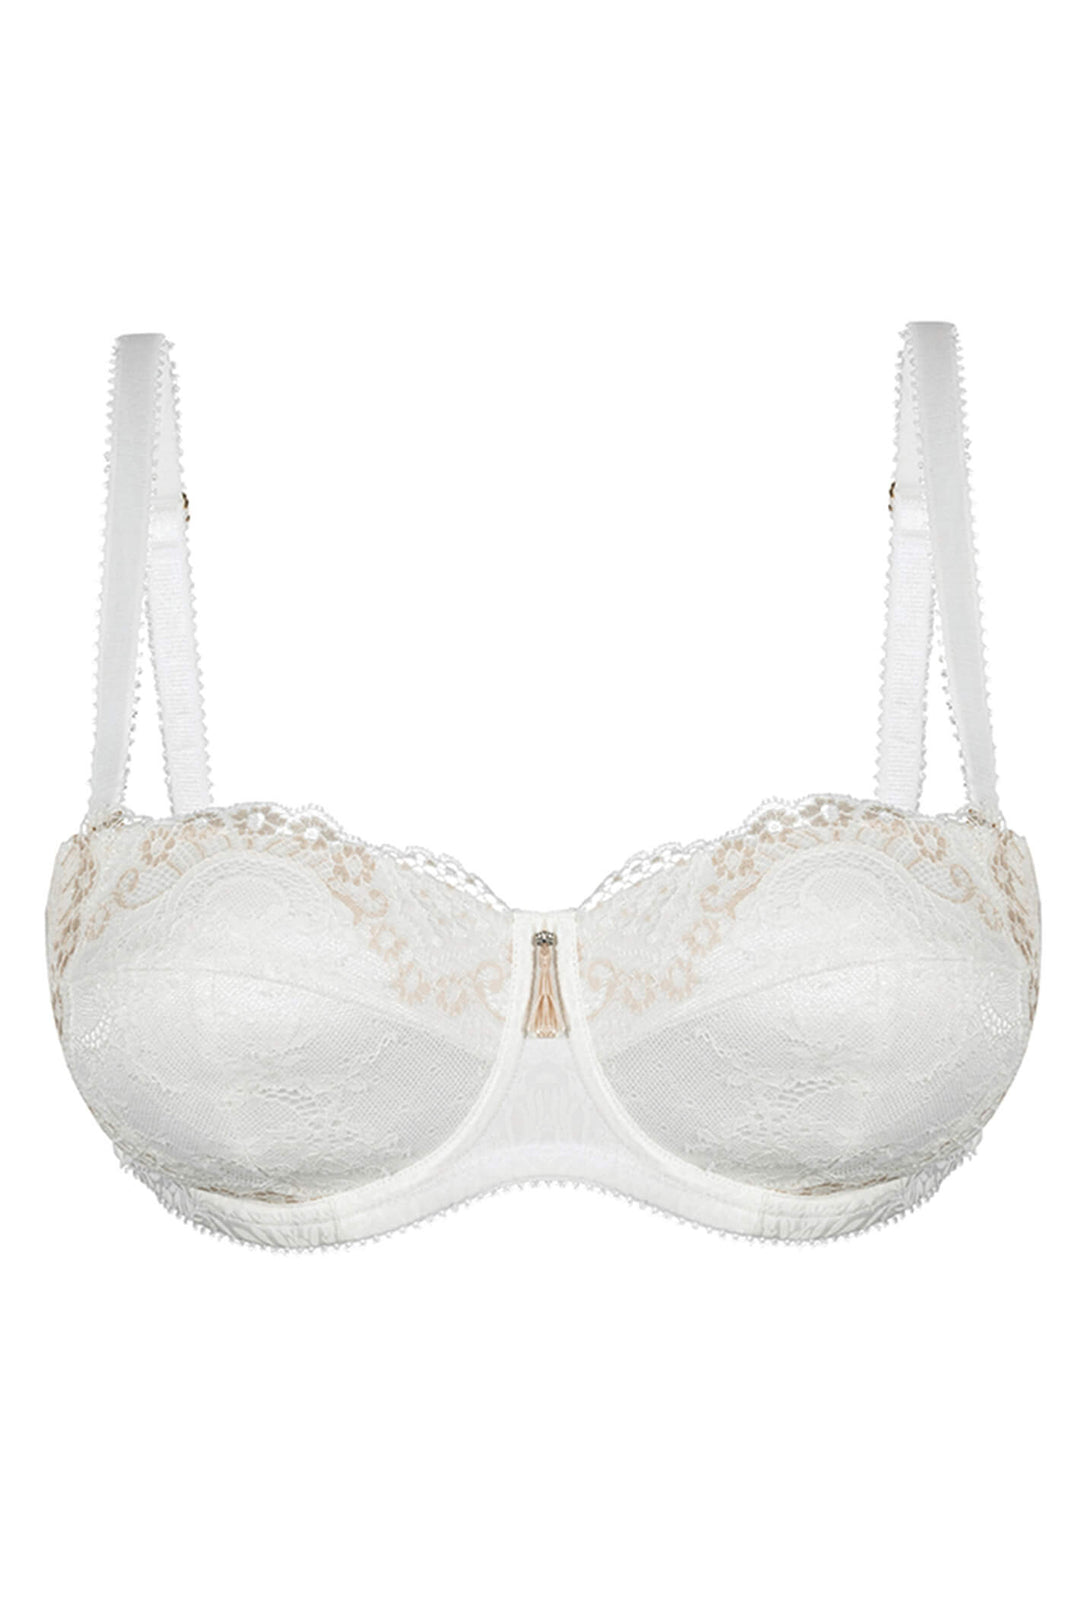 Charnos Bailey Ivory Strapless Moulded Bra - Shirley Allum Boutique